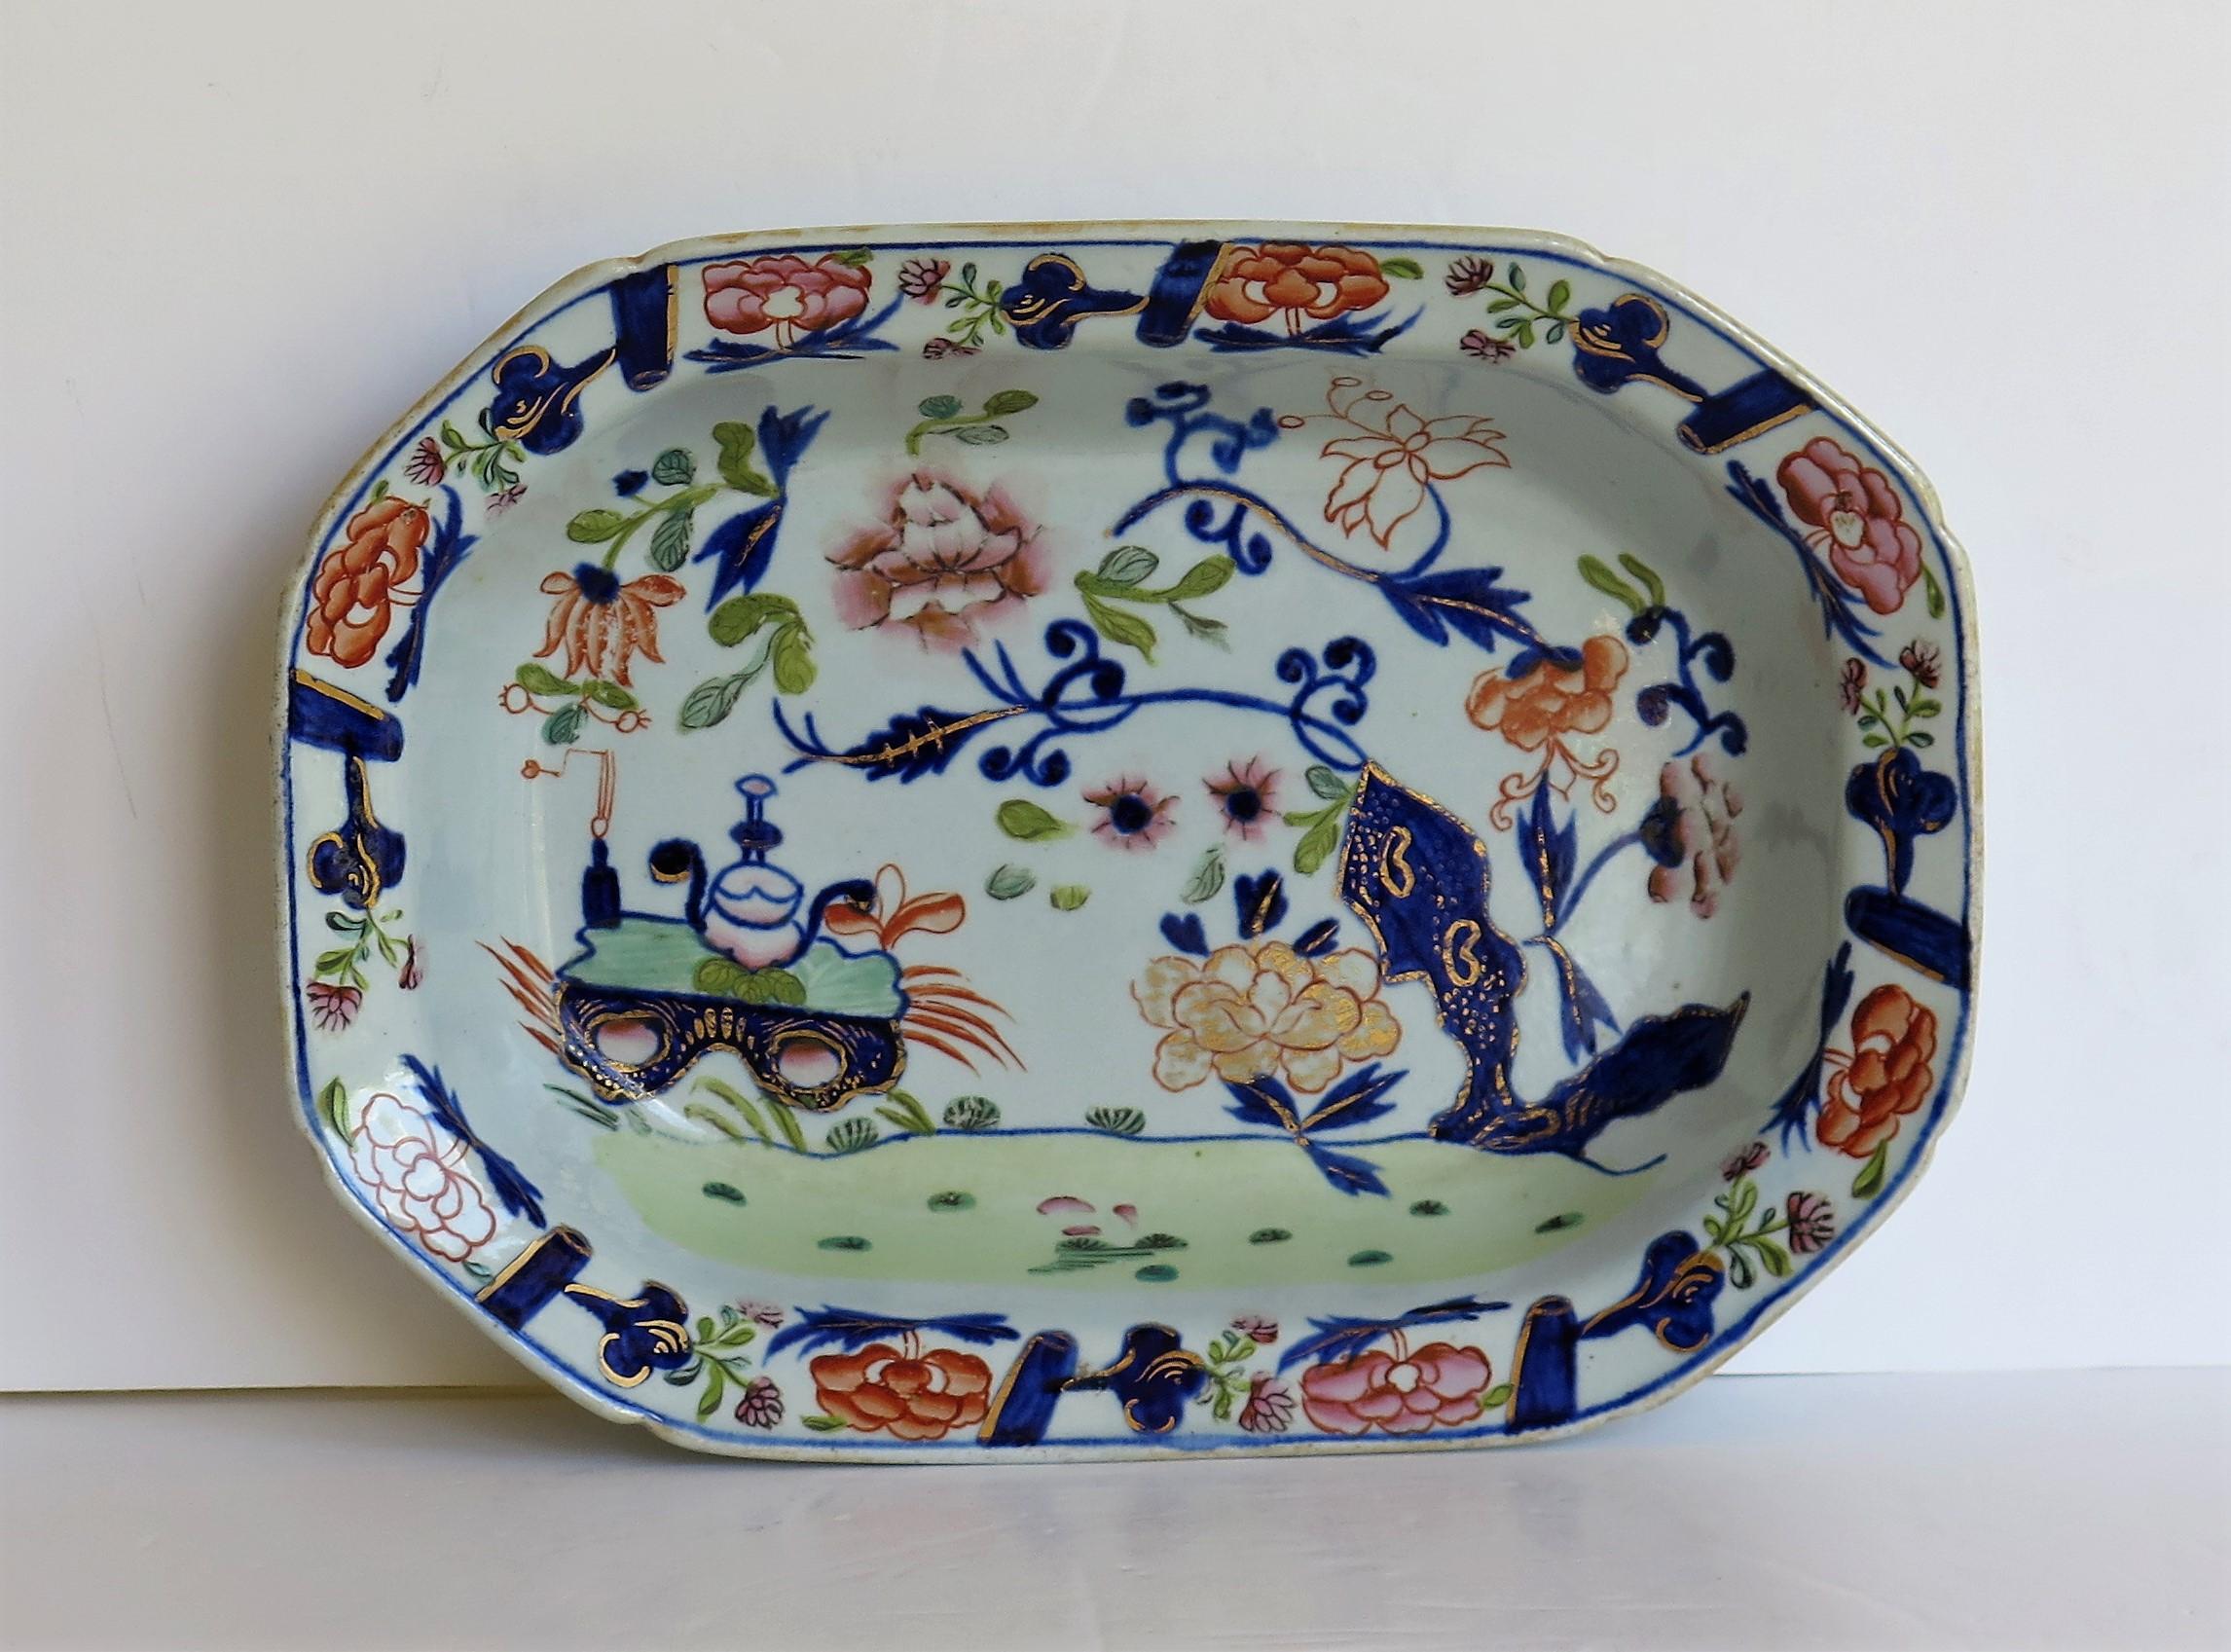 This a Georgian, early 19th century Deep Dish or Pie / Serving Dish made by Mason's Ironstone in the small vase, flowers and rock gilded chinoiserie pattern, dating to circa 1815.

This Pie dish is well potted as a deep open Serving dish or